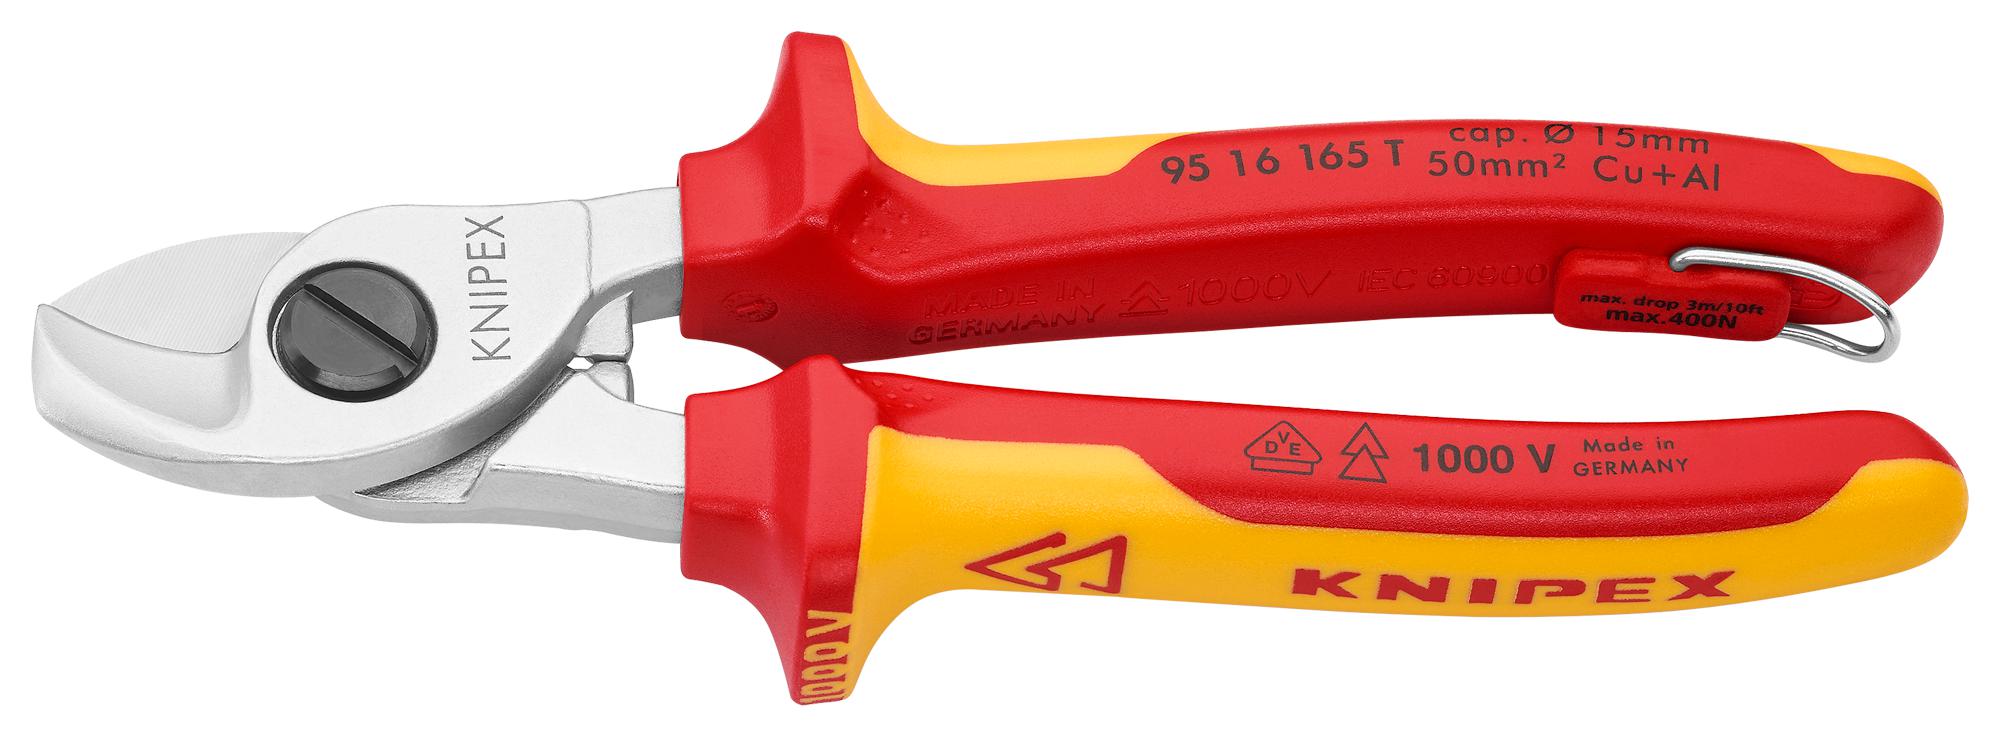 95 16 165 T CABLE CUTTER, 15MM, 165MM KNIPEX